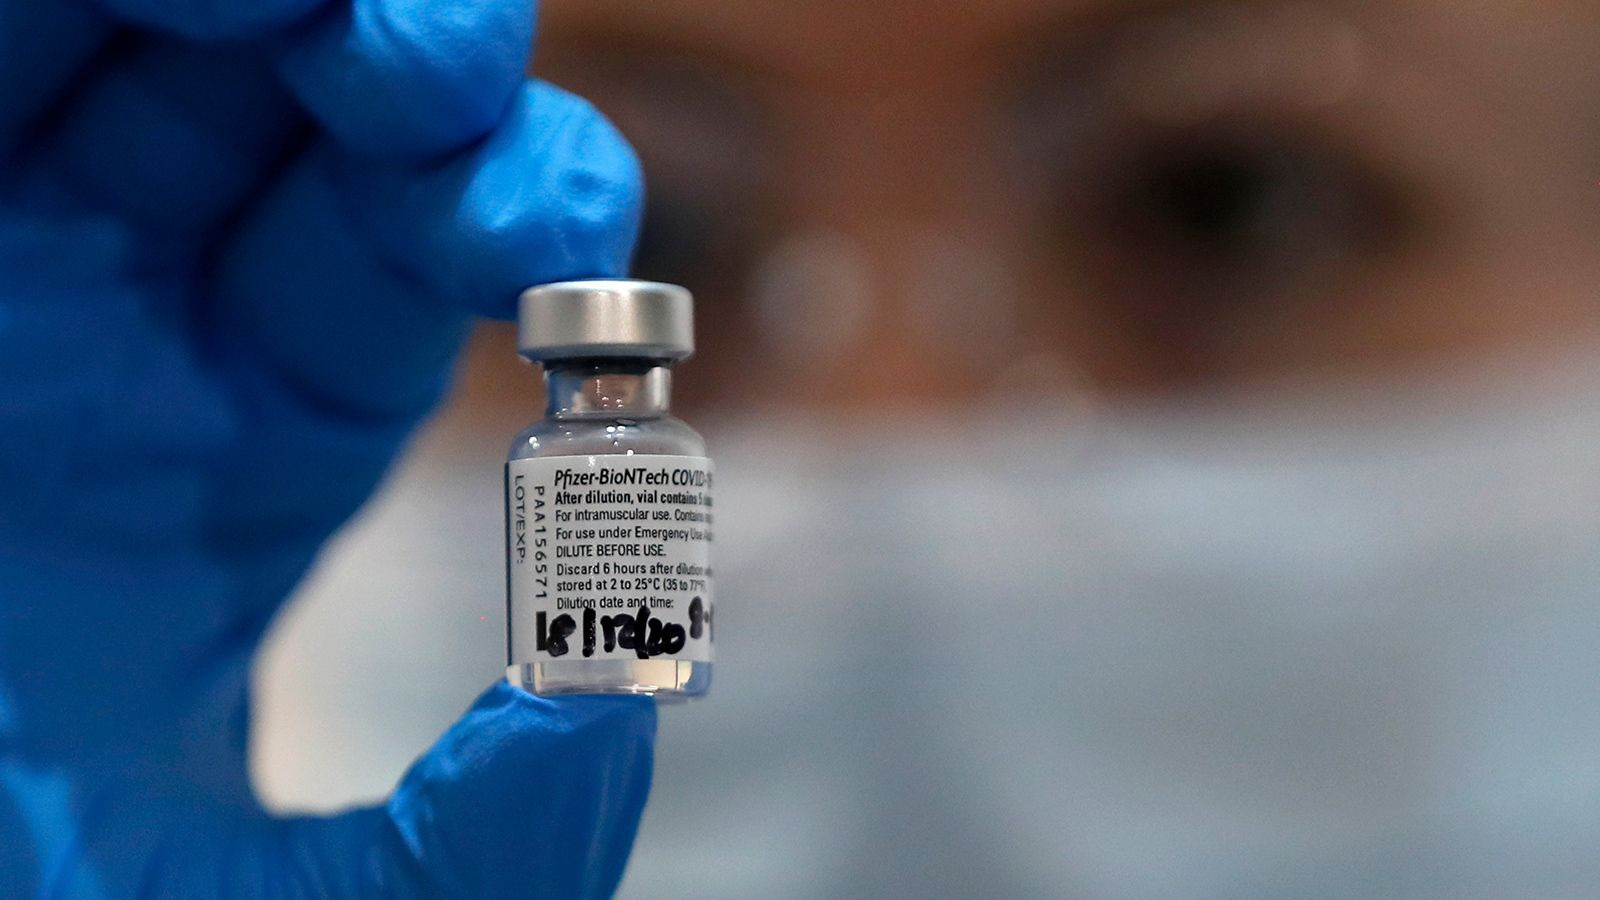 Pfizer BioNTech's Covid 19 Vaccine Forecast To Capture $30B In Sales